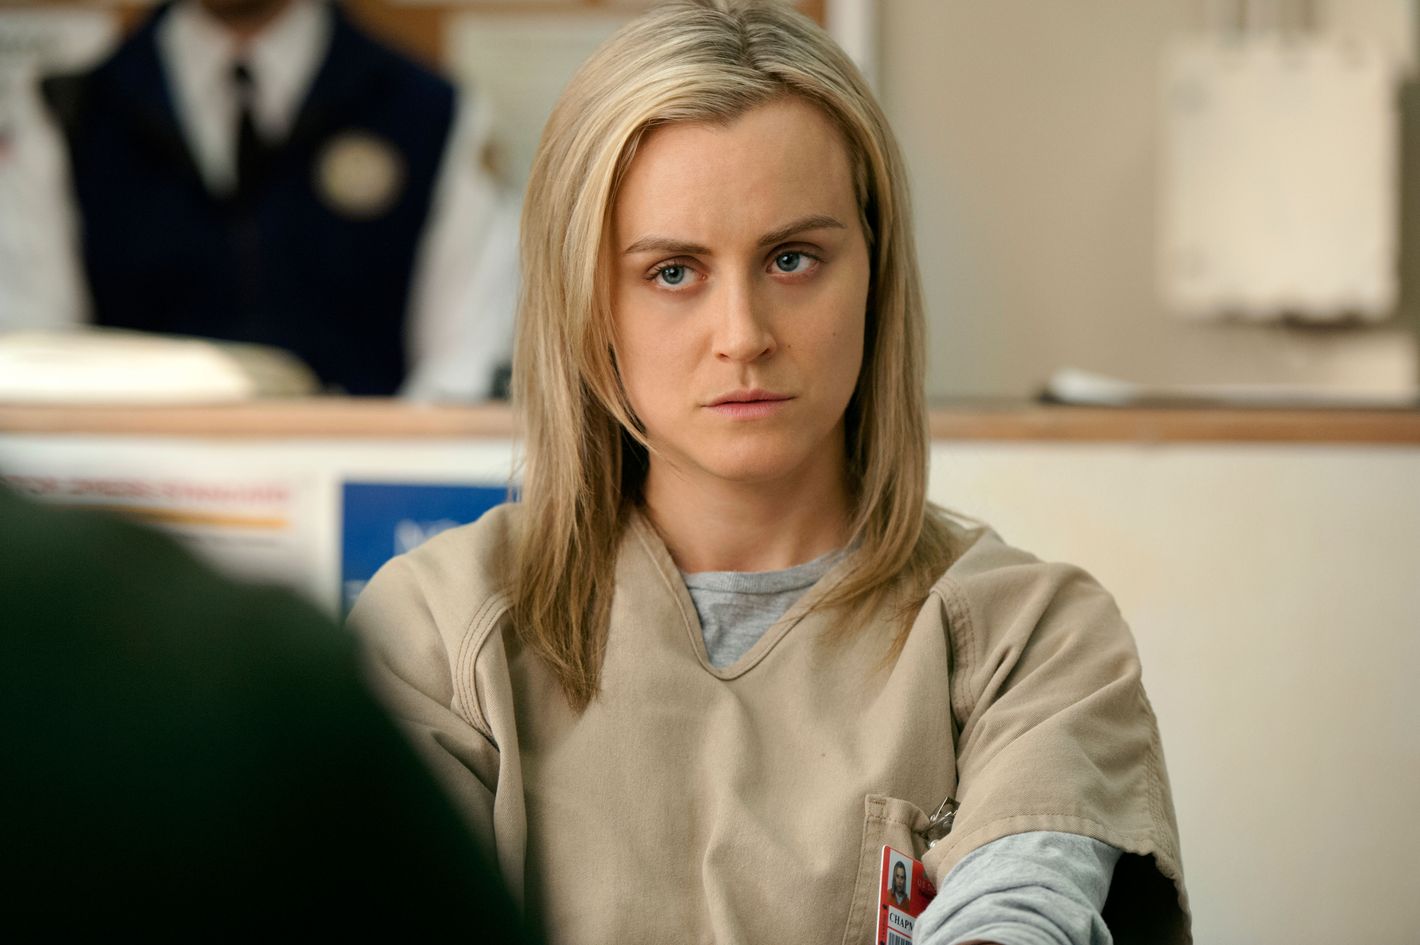 10 Beauty and Hair Secrets From Orange Is the New Black Season 2